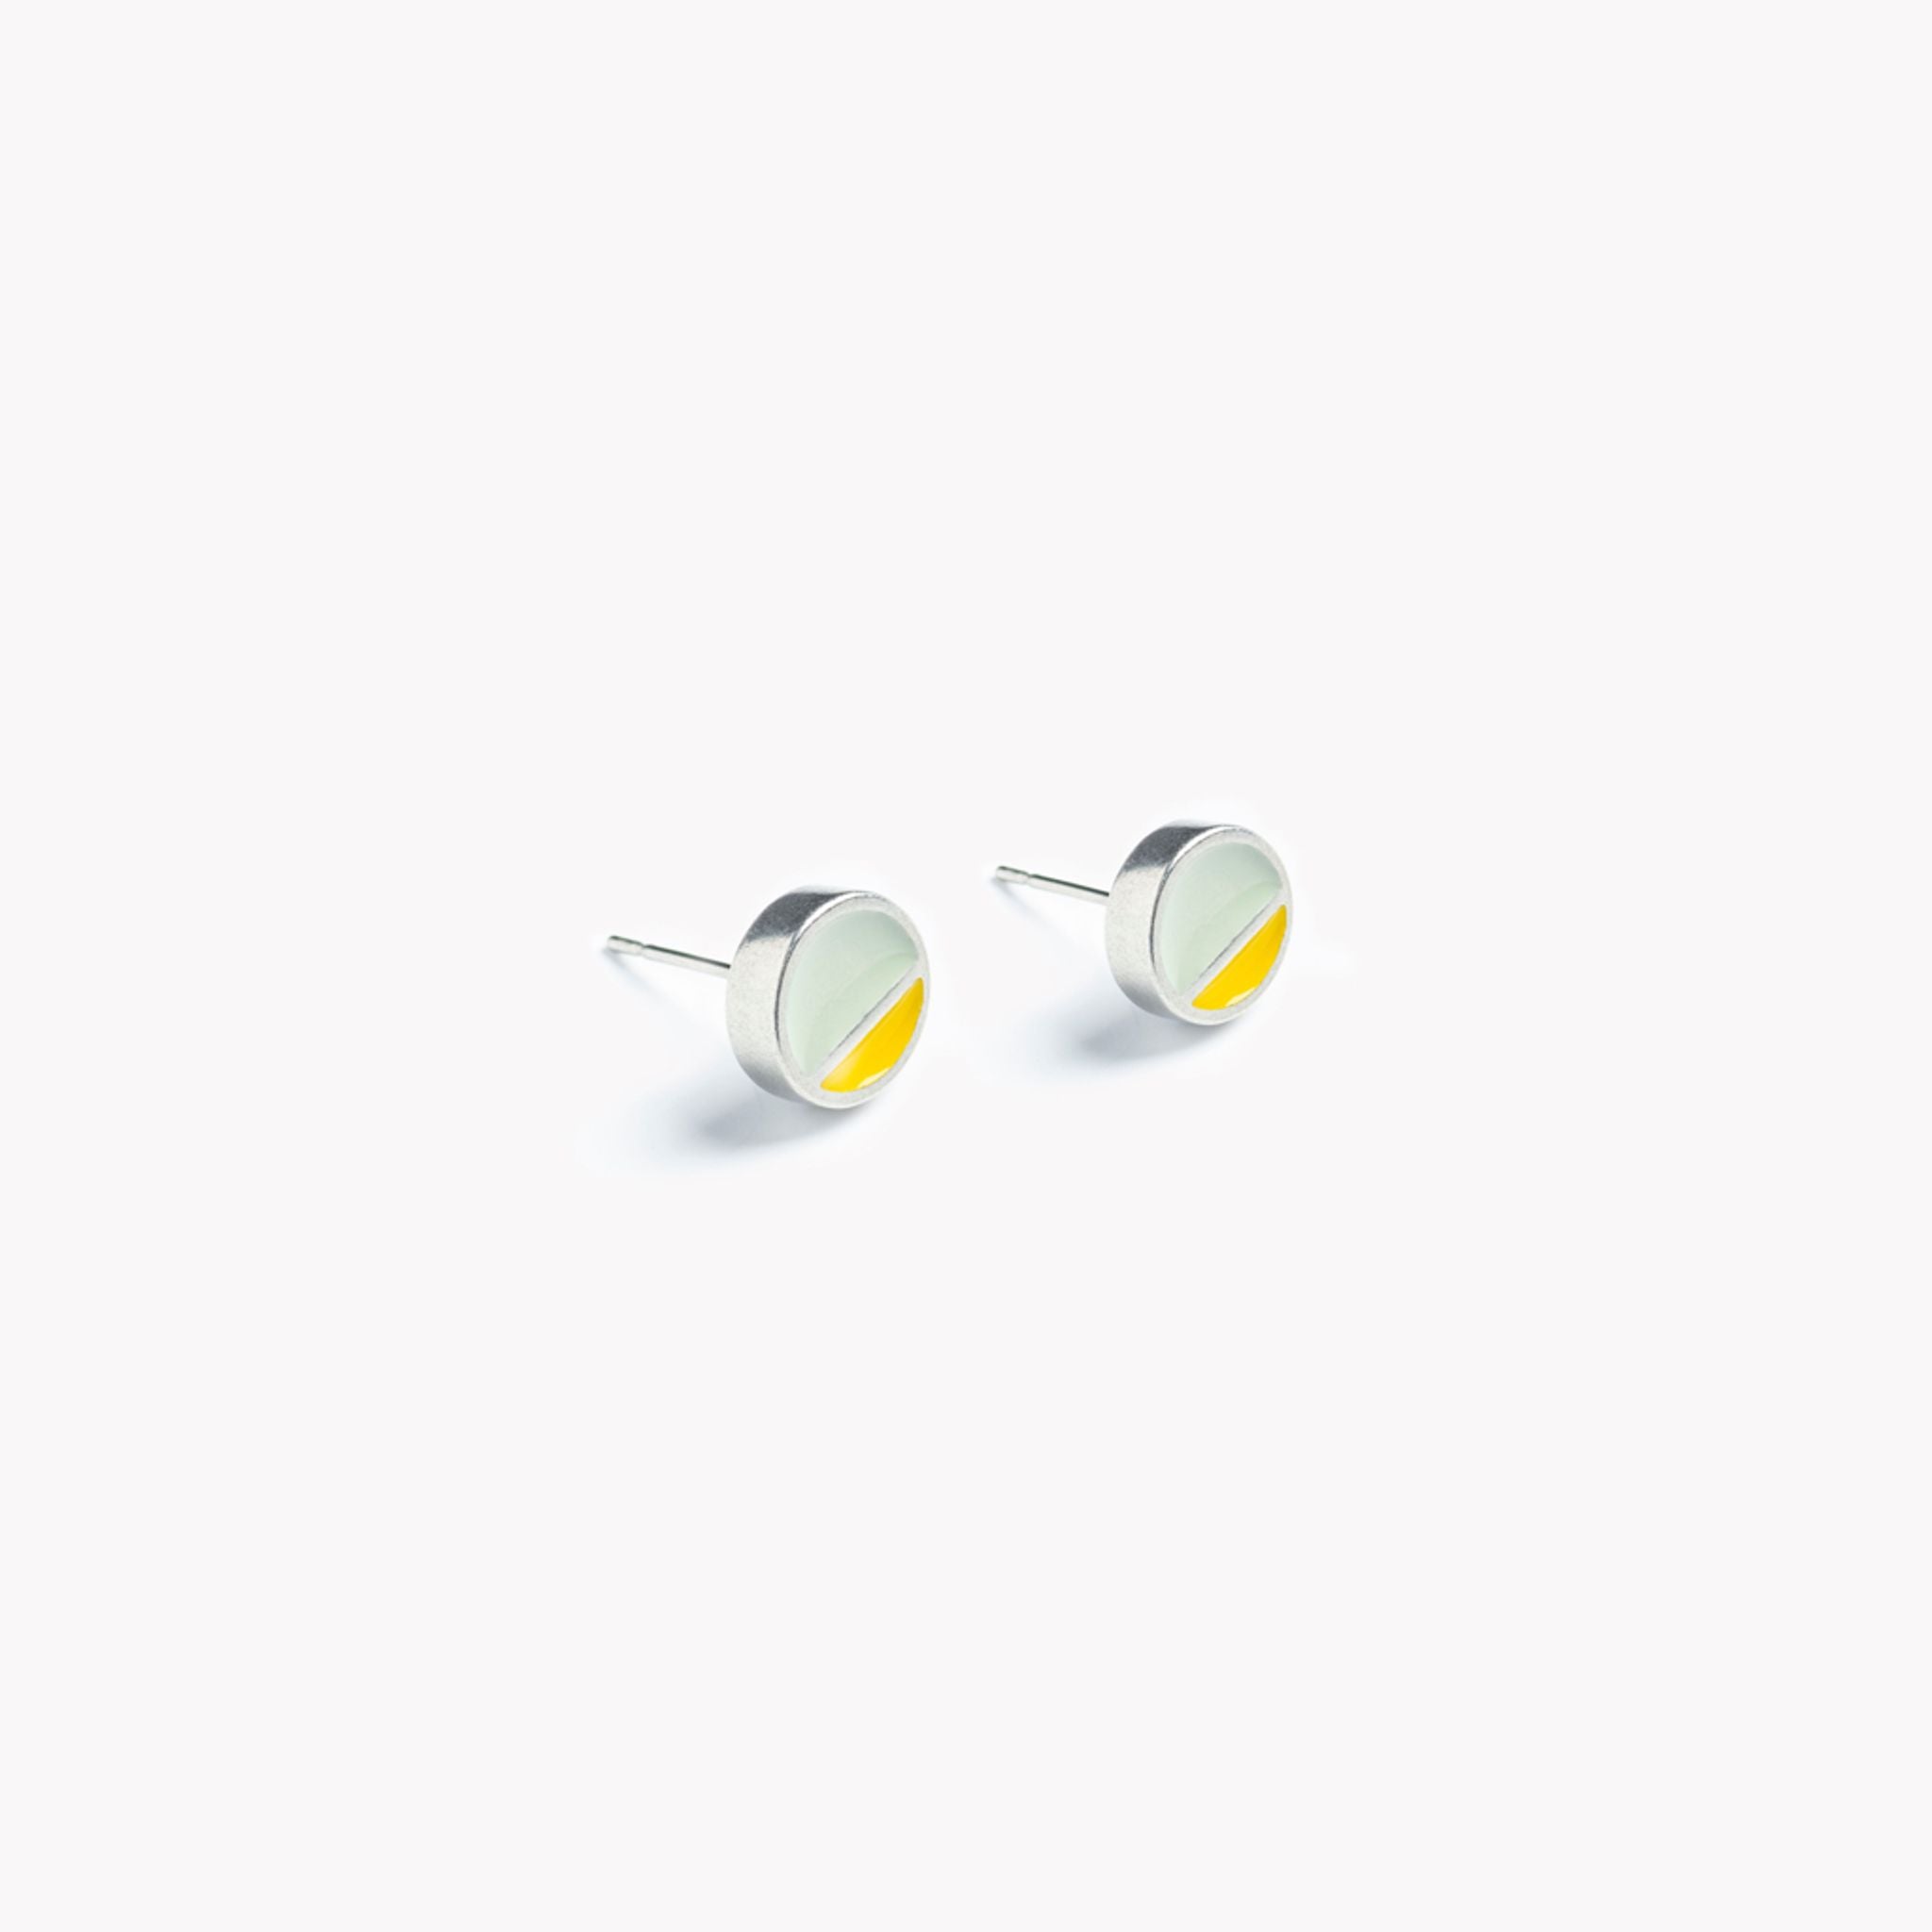 A simple pair of circular stud earrings with a horizontal division. In yellow and grey.